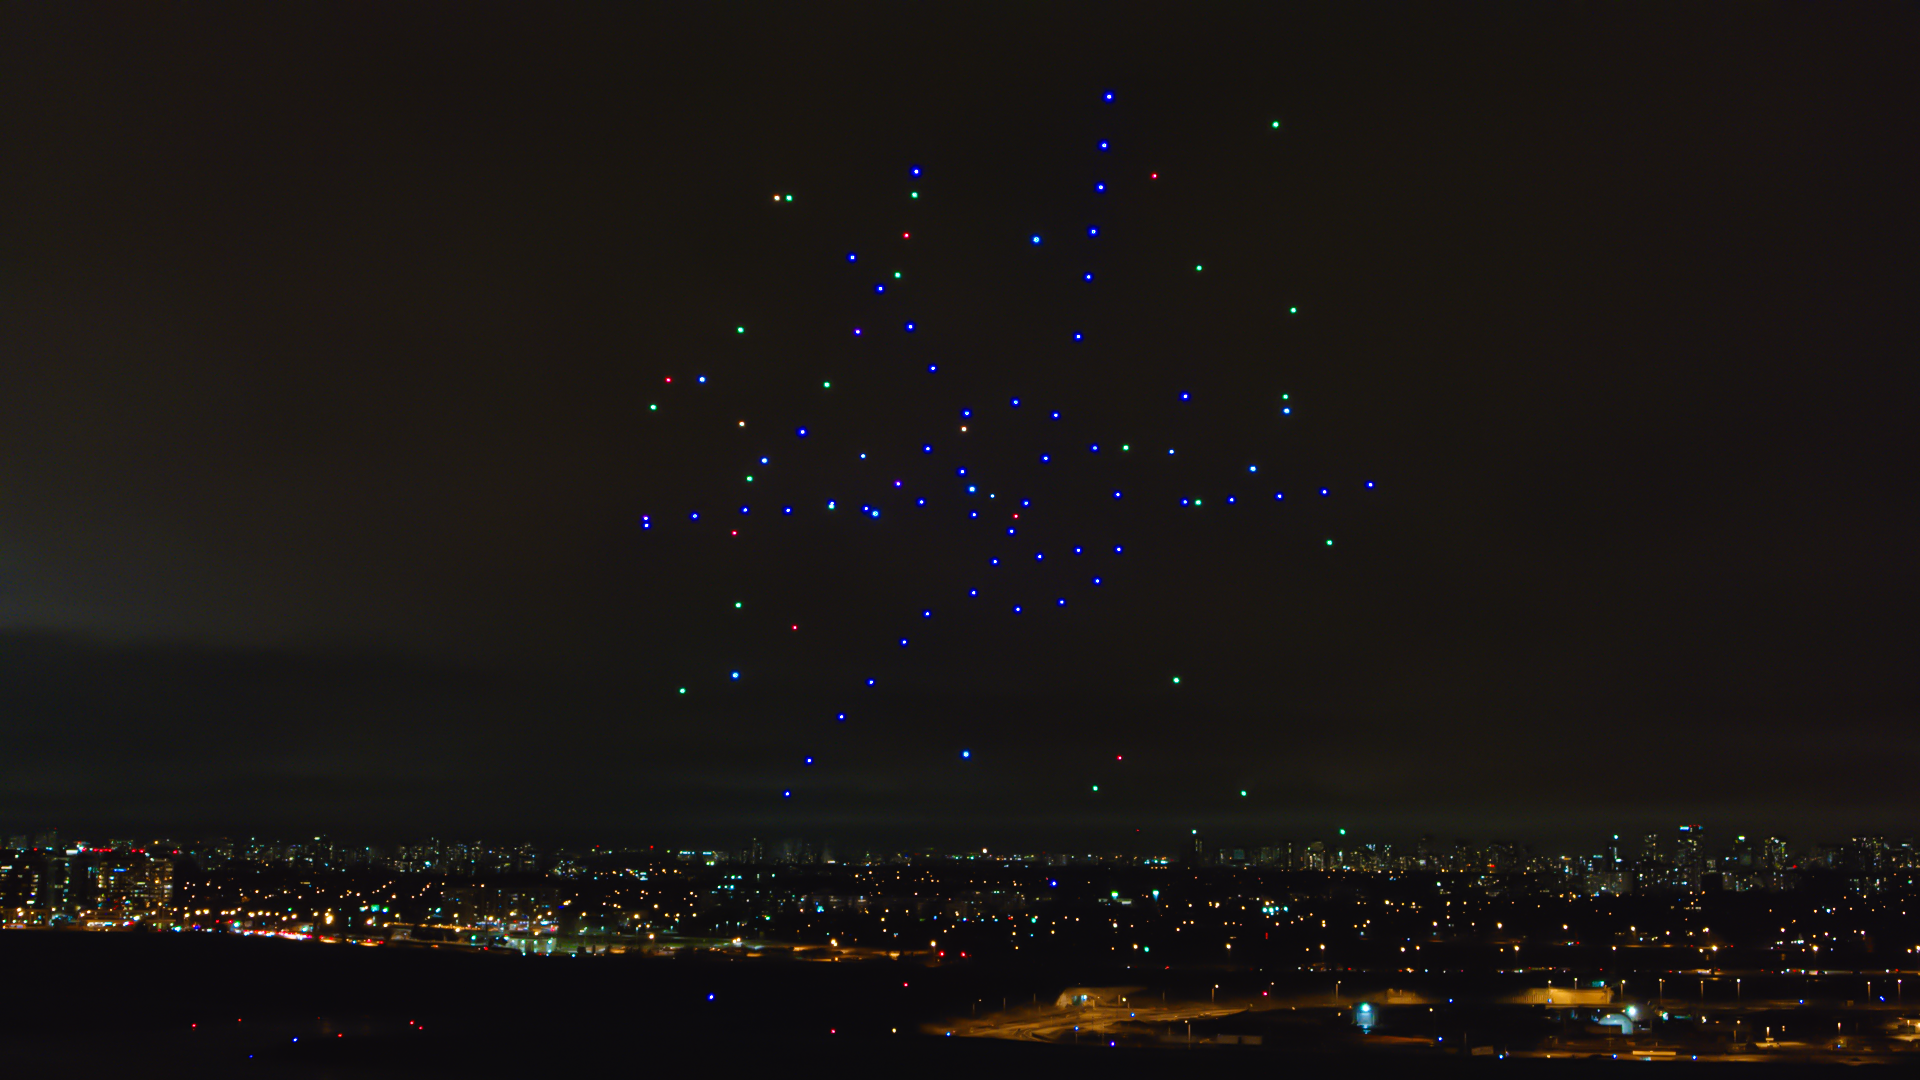 abstract image formed in an illuminated flying drone performance in the sky